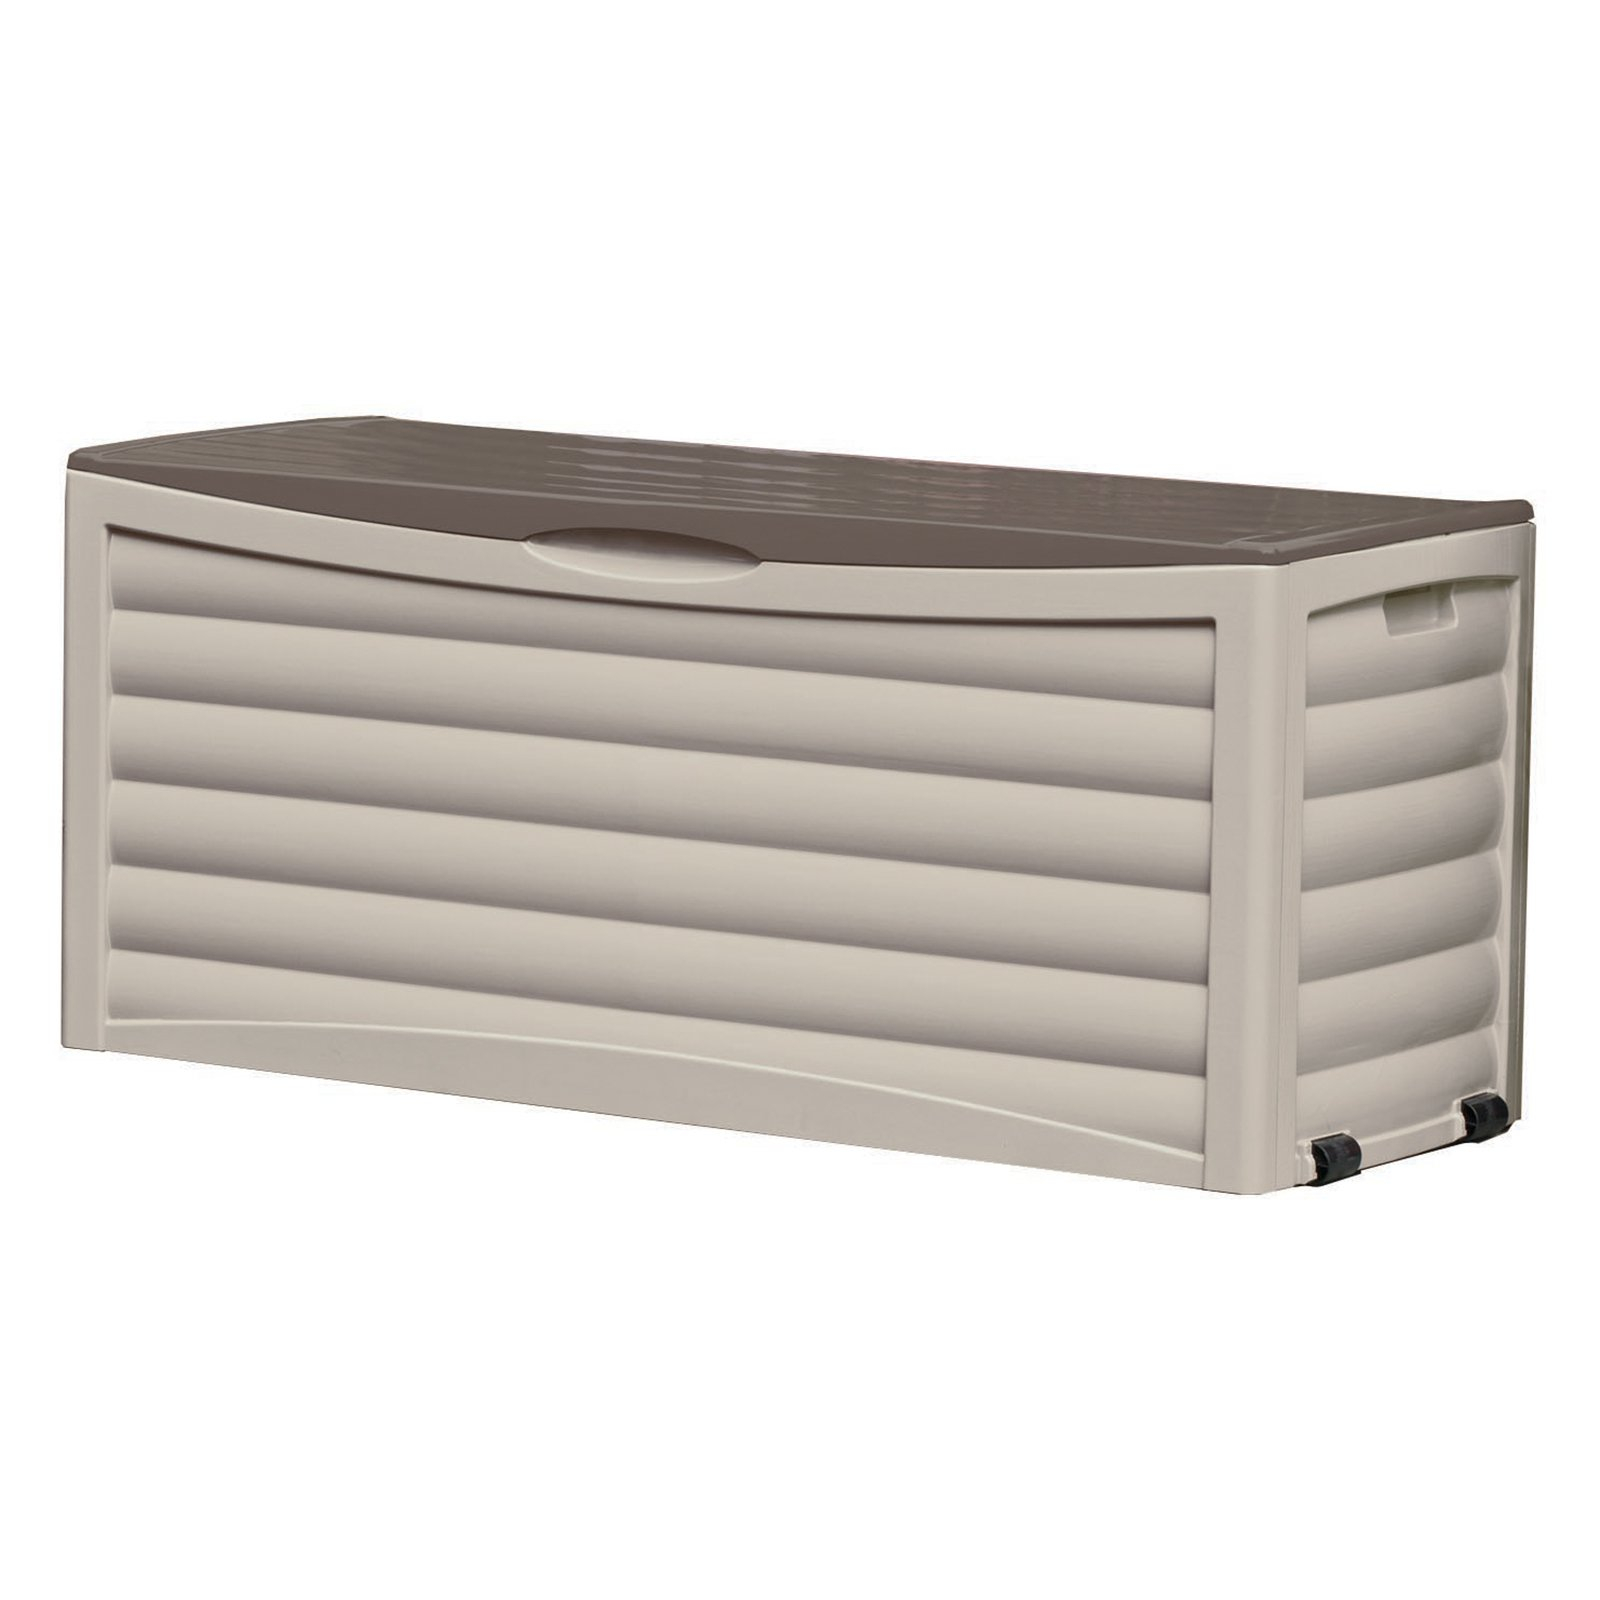 Suncast 103 Gal Deck Box Light Taupe Handle Rollers For Easy regarding measurements 1600 X 1600